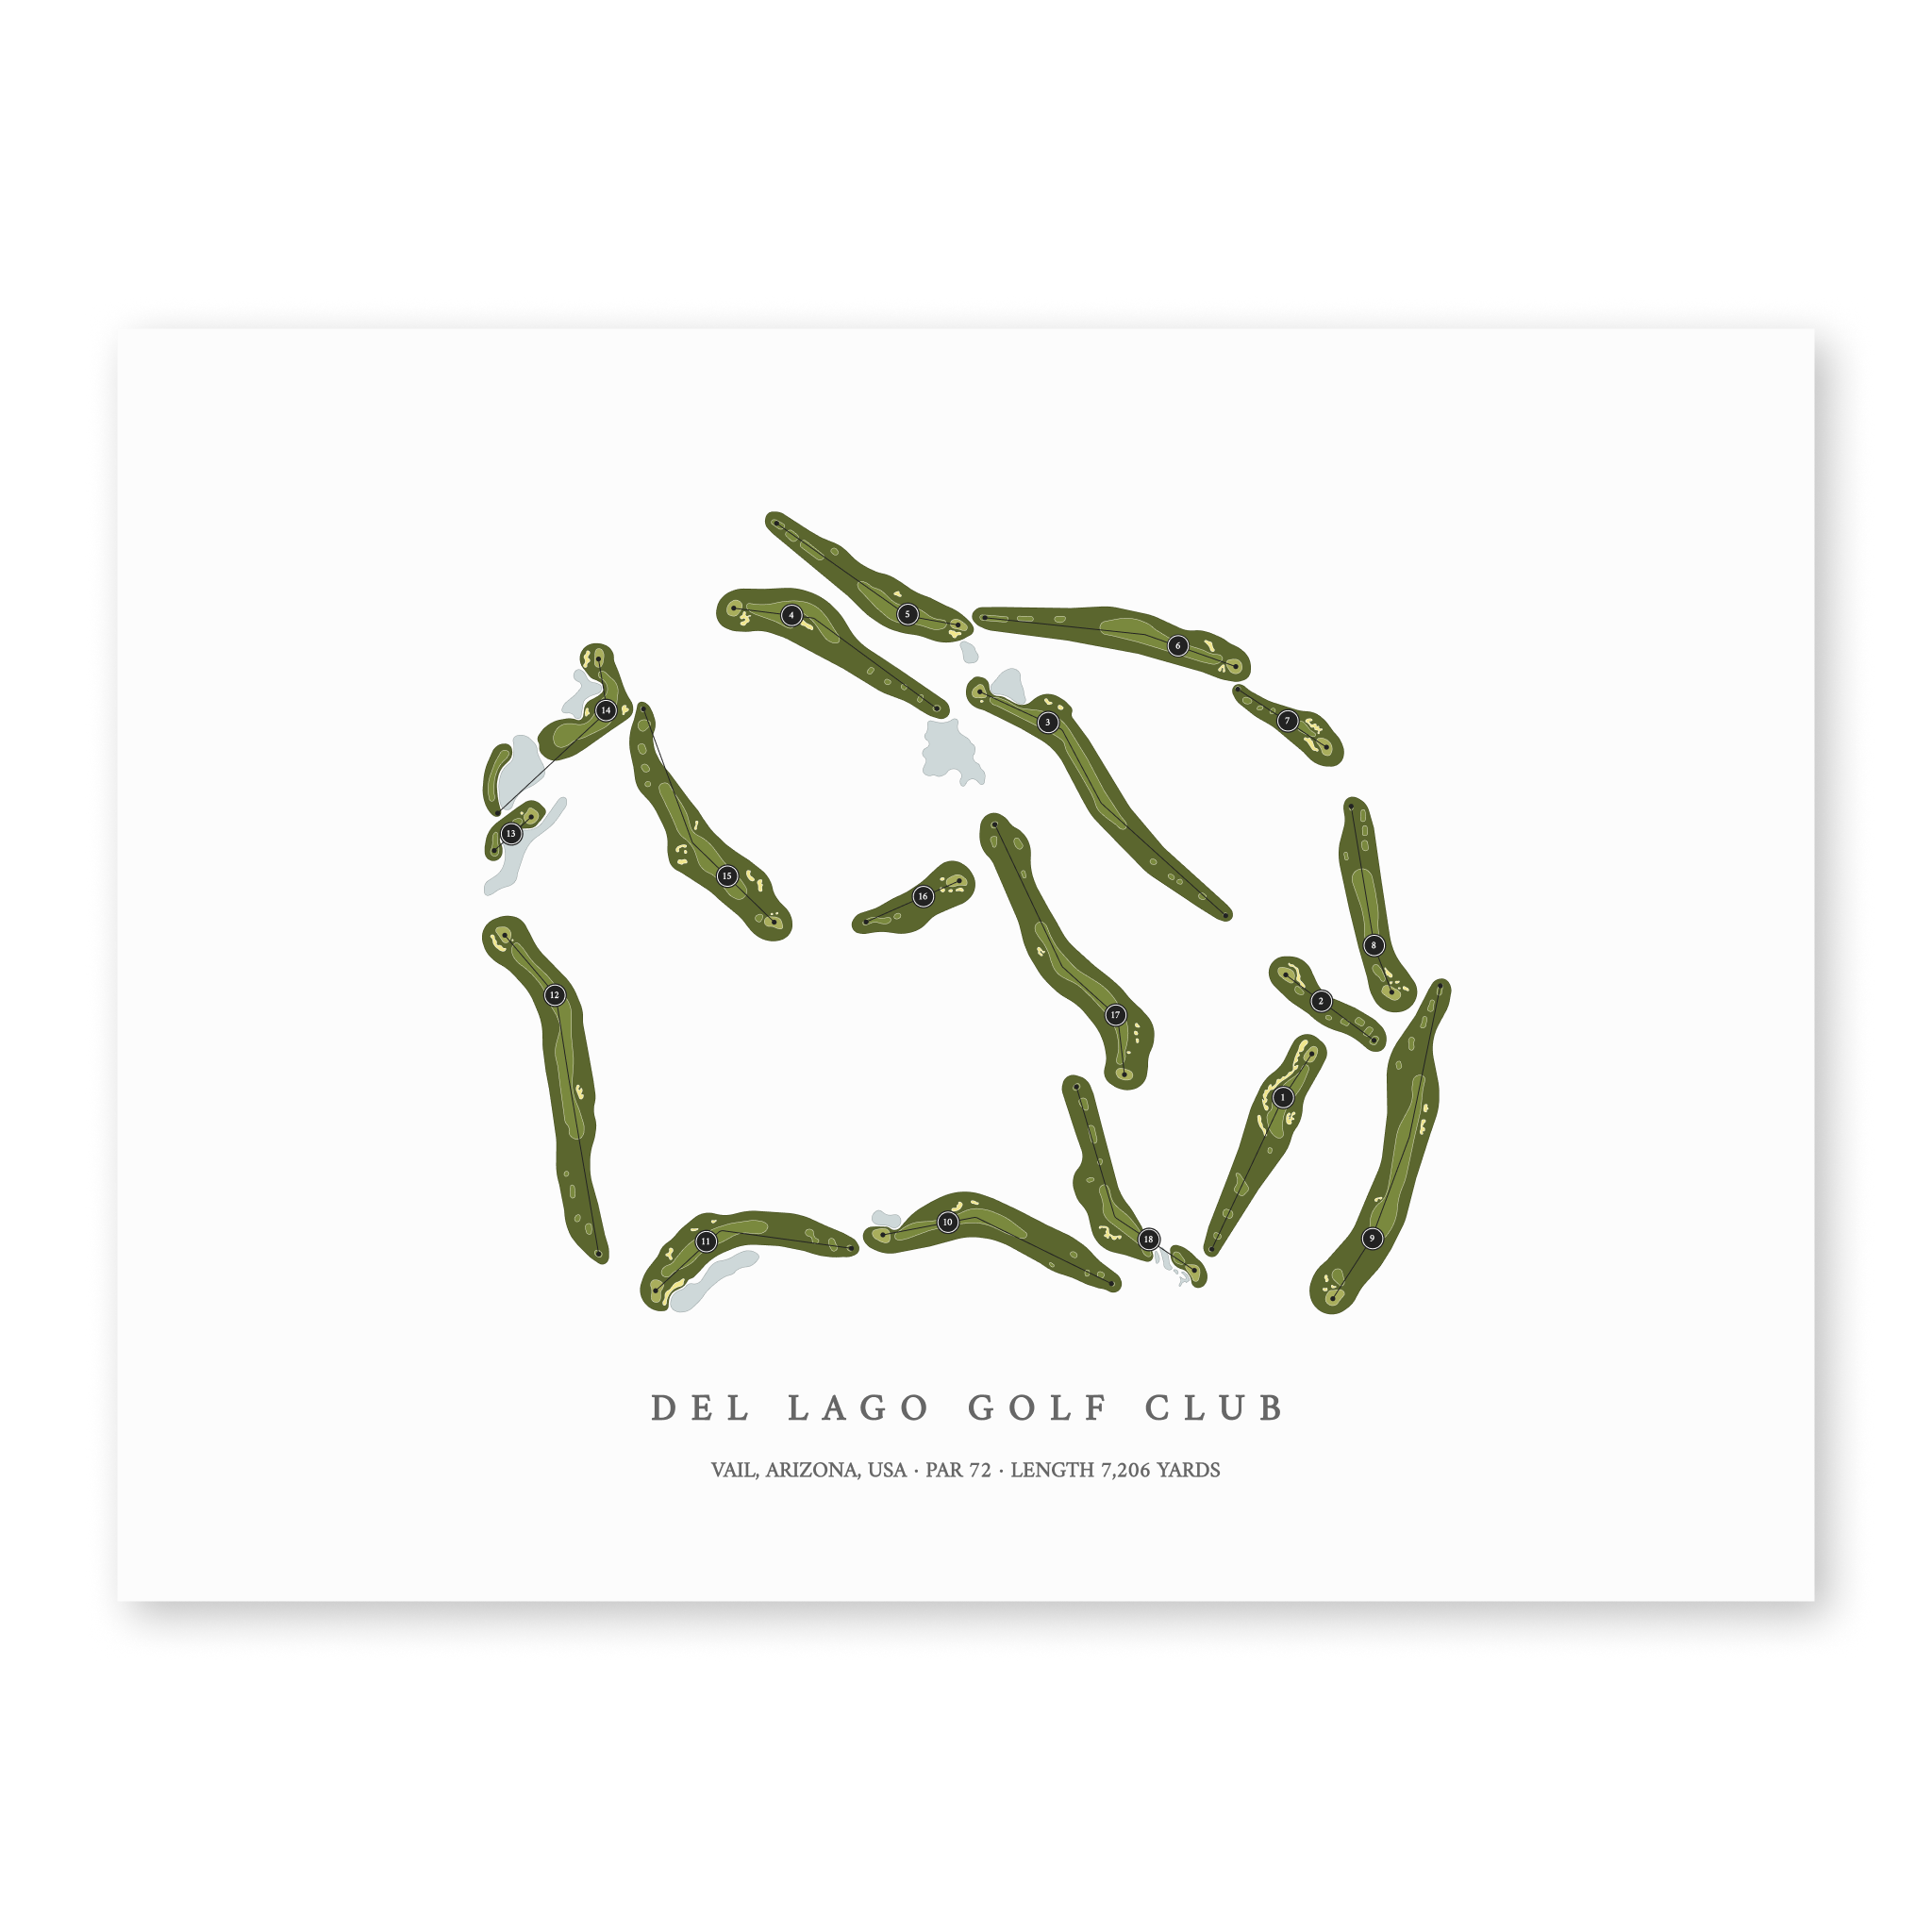 Del Lago Golf Club | Golf Course Map | Unframed With Hole Numbers #hole numbers_yes